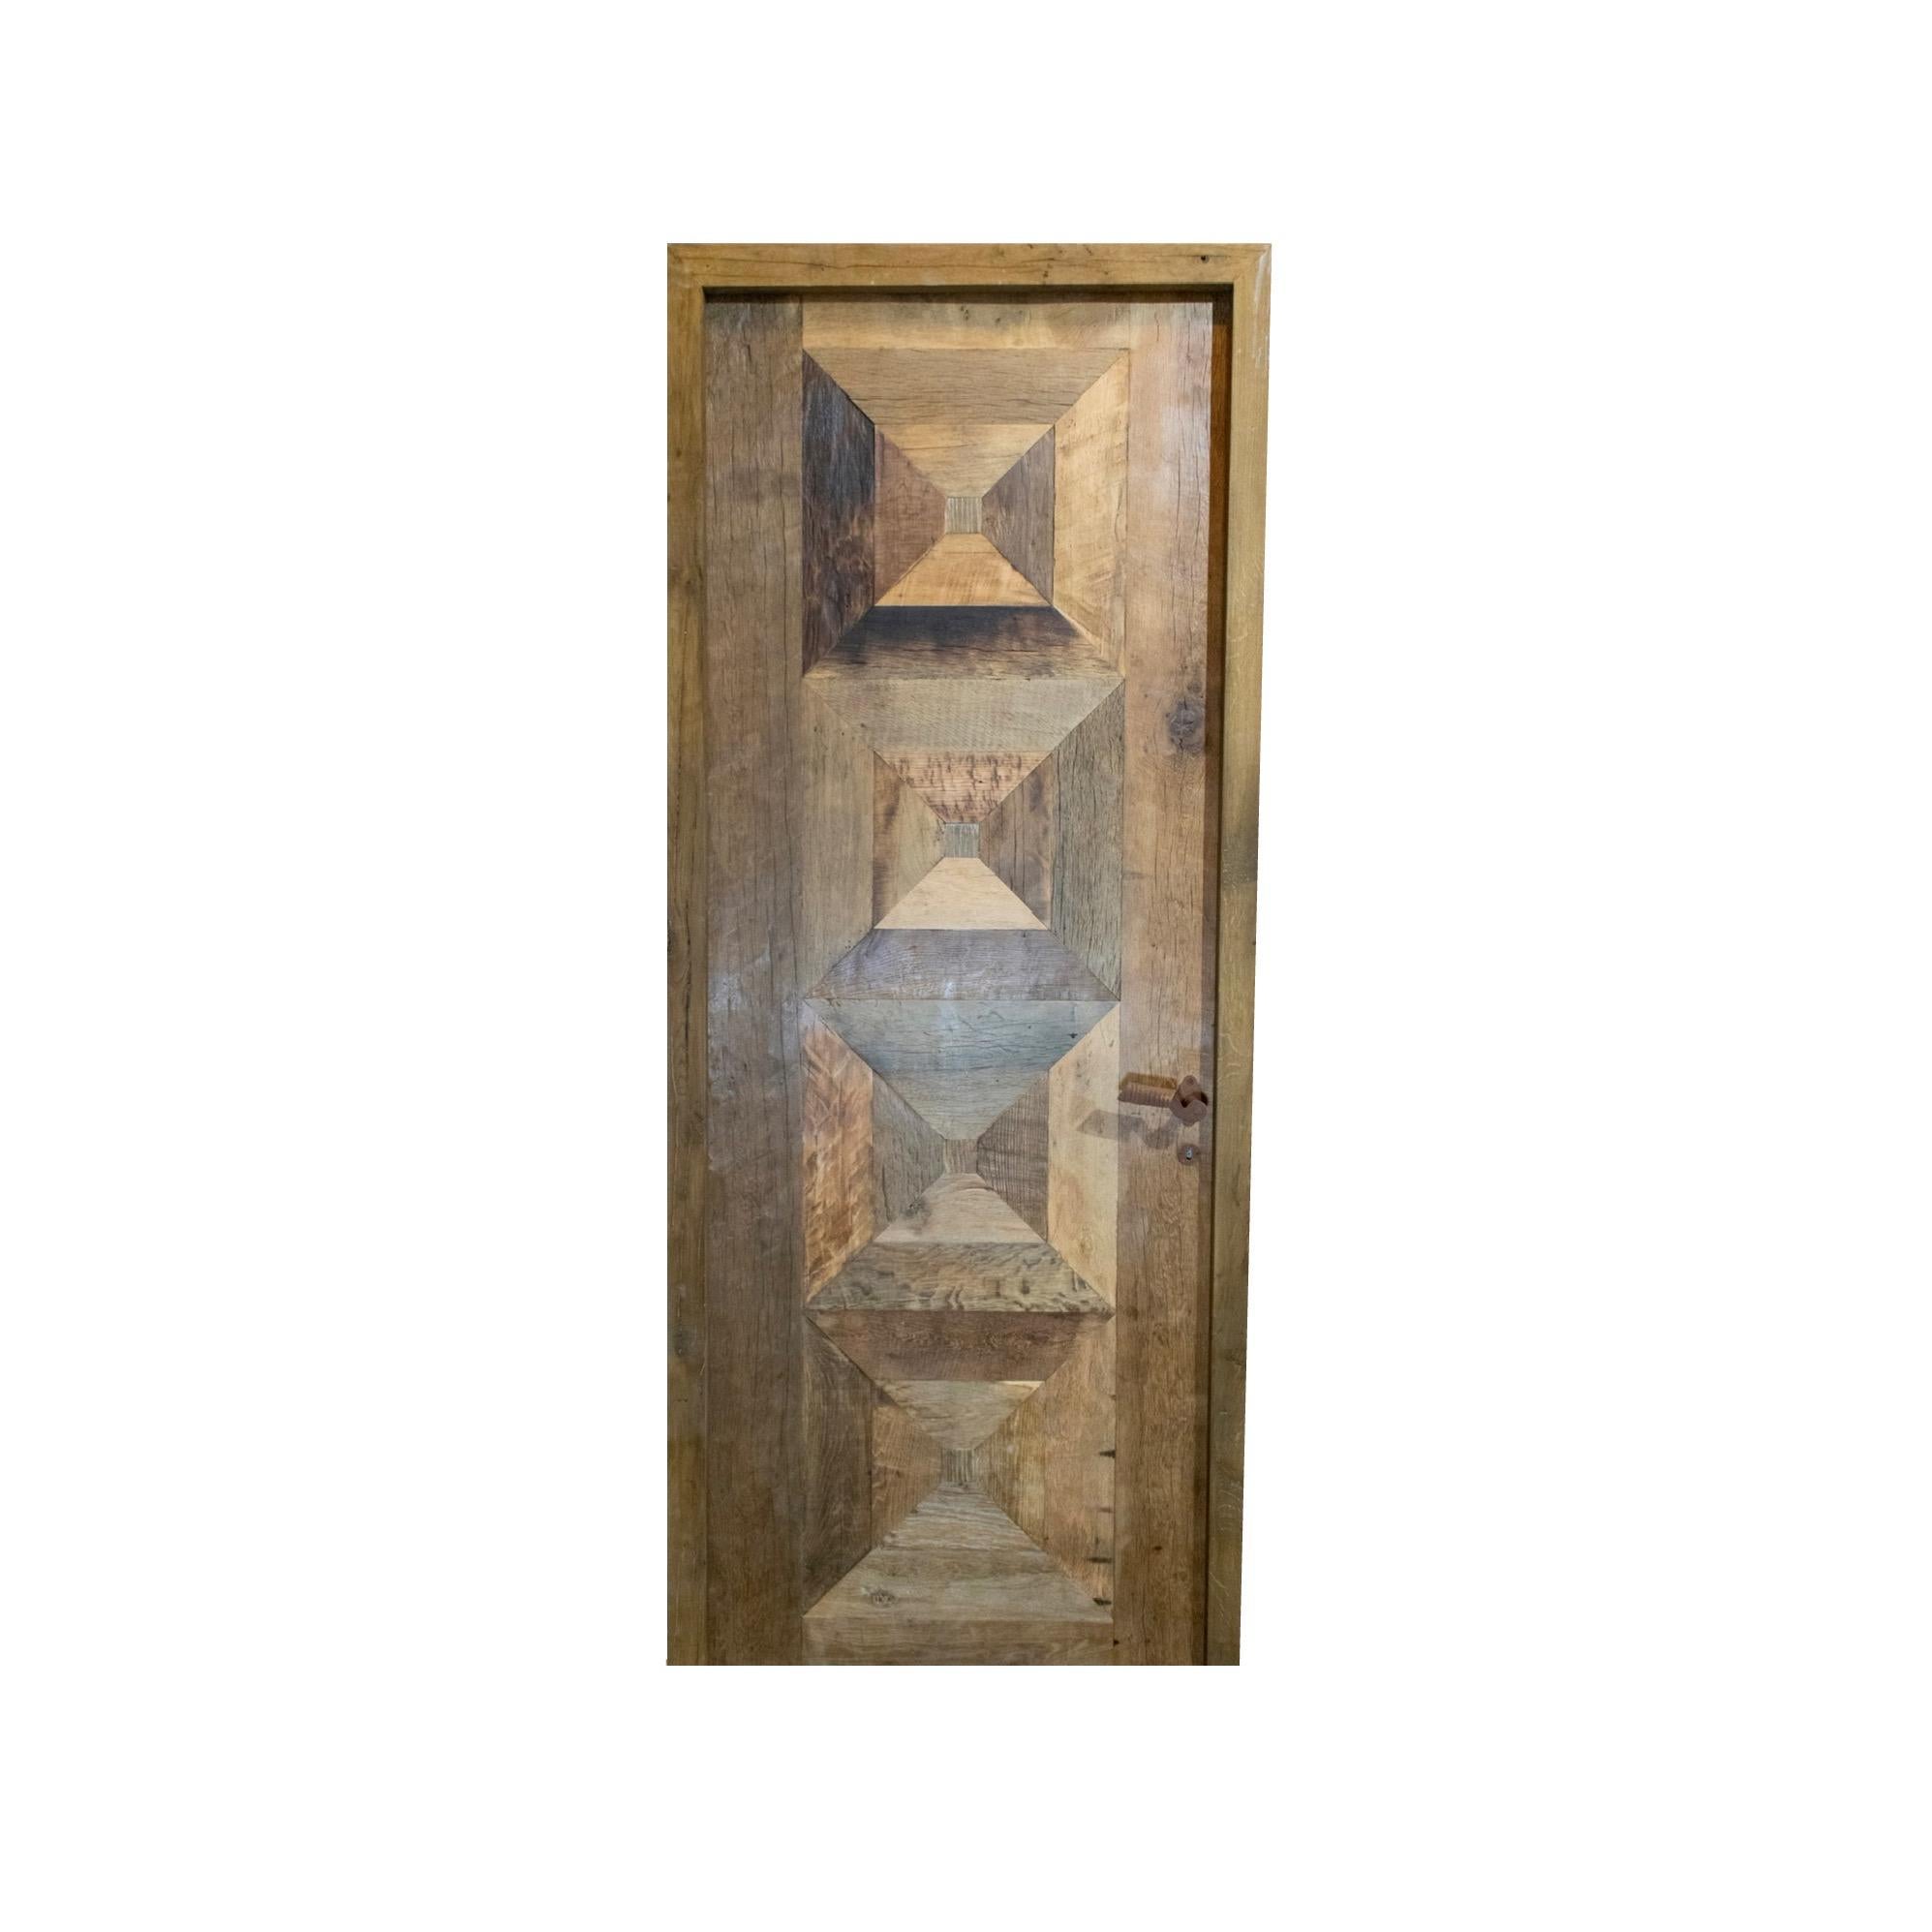 A reclaimed door made out of newly constructed Oakwood. Door is lock ready and comes with a key. Circa, 18th century. 

Reclaimed rustic doors are doors made from used materials that have been refurbished and given a new purpose. They often have a